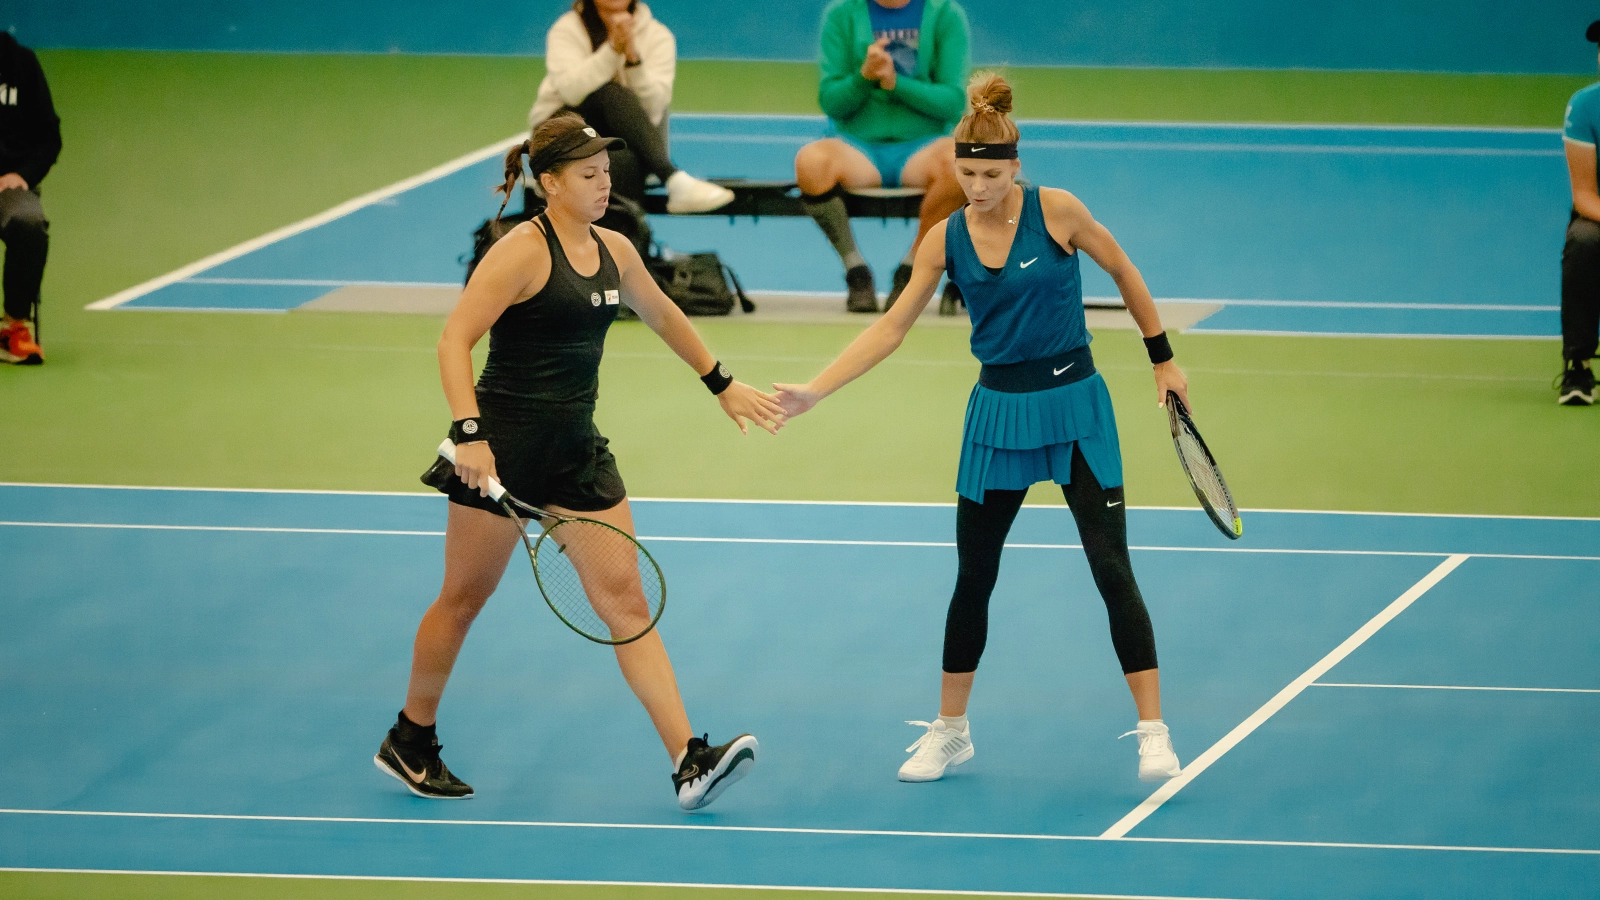 Piter and Falkowska in the finals! Emotional victory for Tatjana Maria.